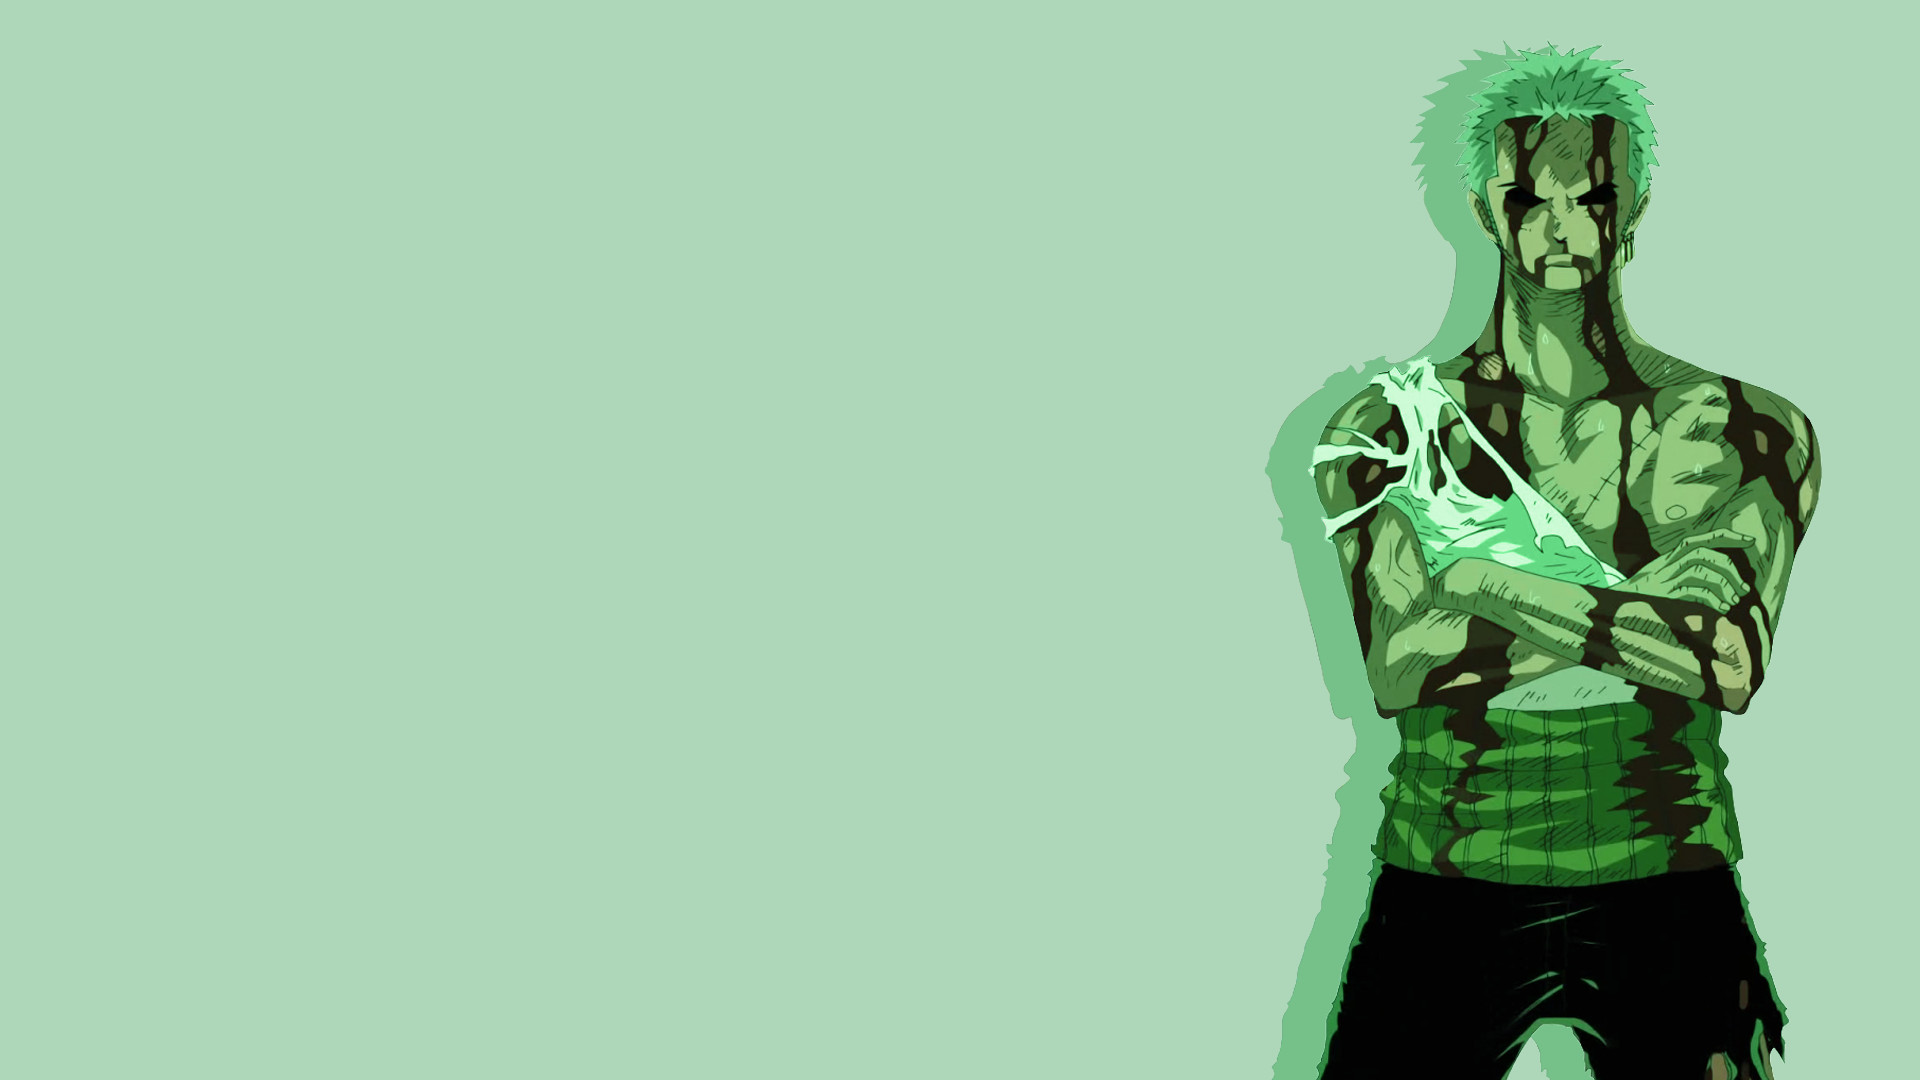  Zoro  One  Piece  Wallpapers    WallpaperTag